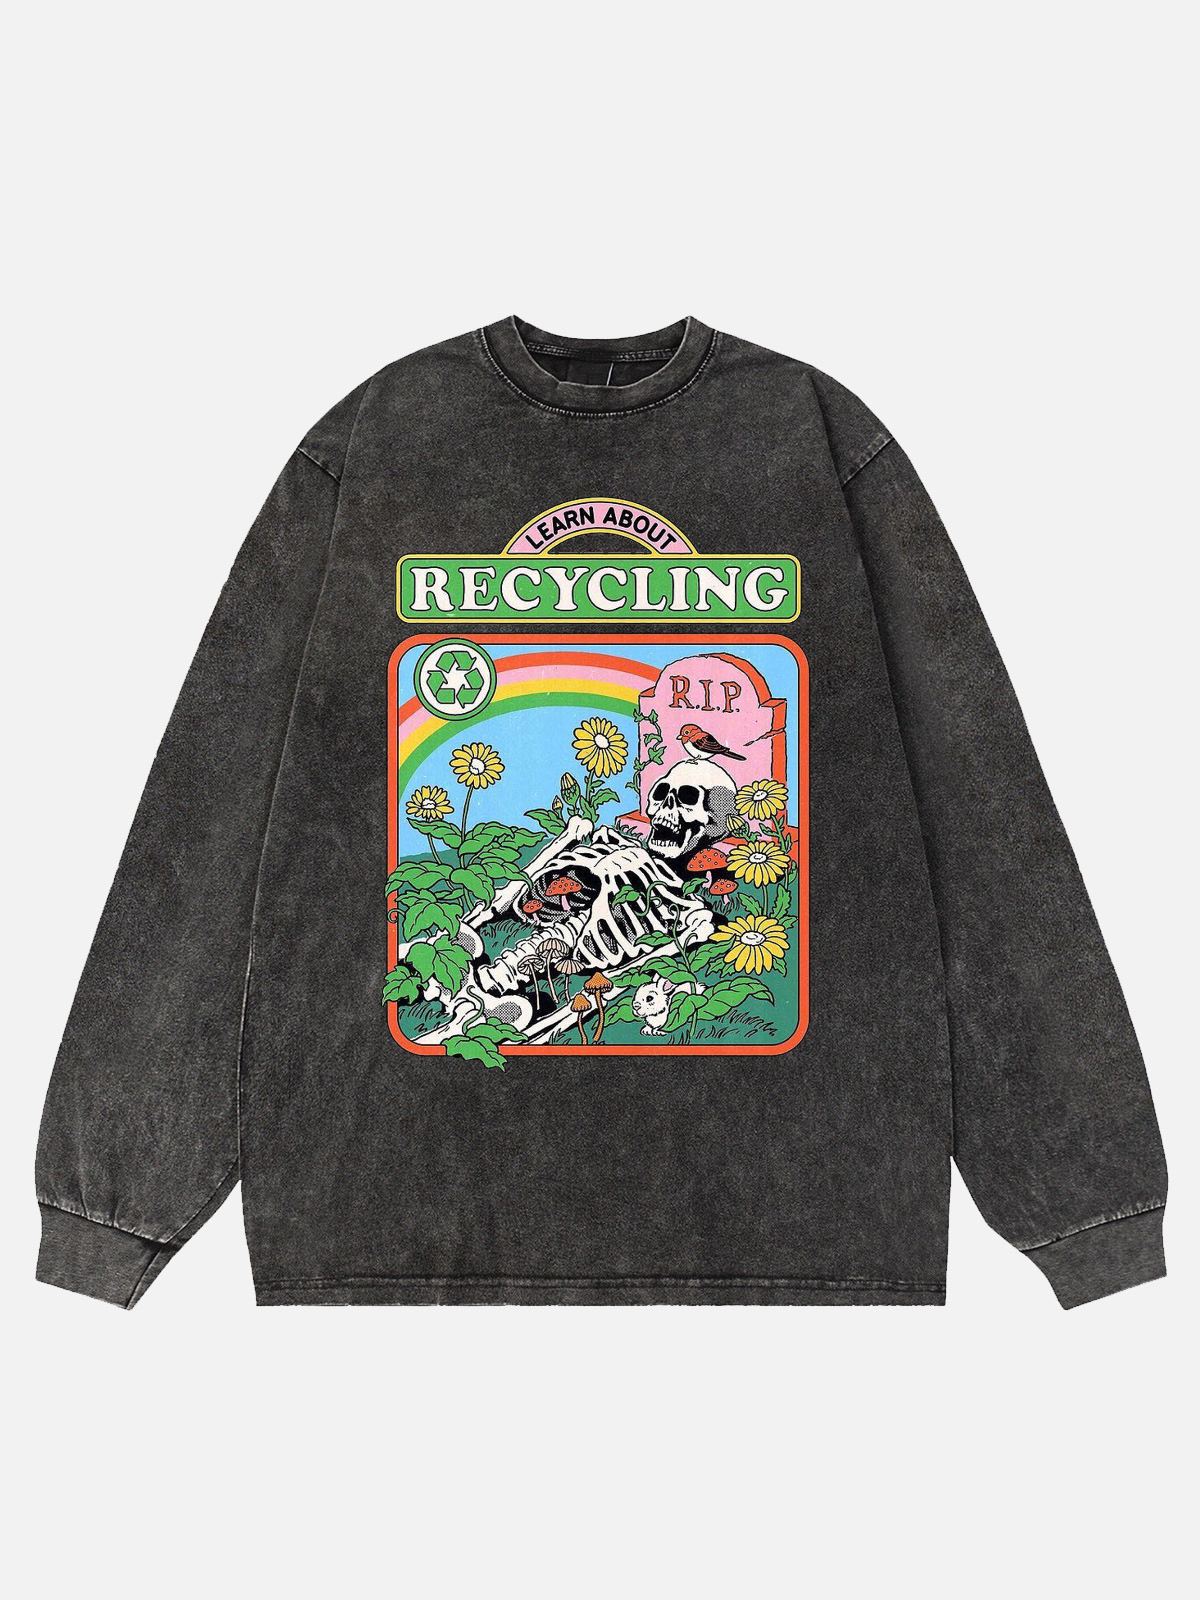 Learn About Recycling Washed Long Sleeve T-Shirt